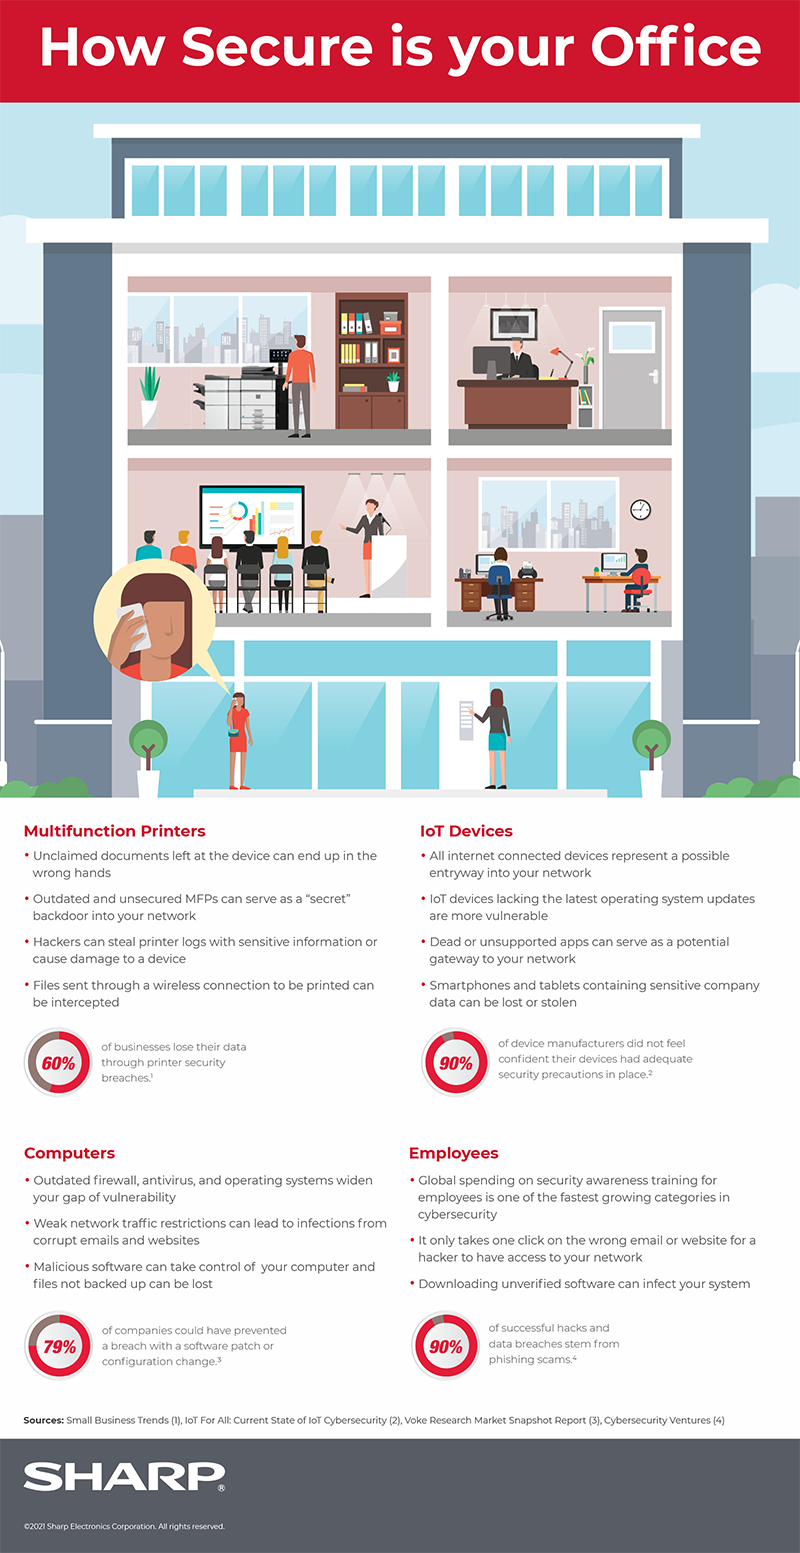 How Secure Is Your Office? infographic with text version below